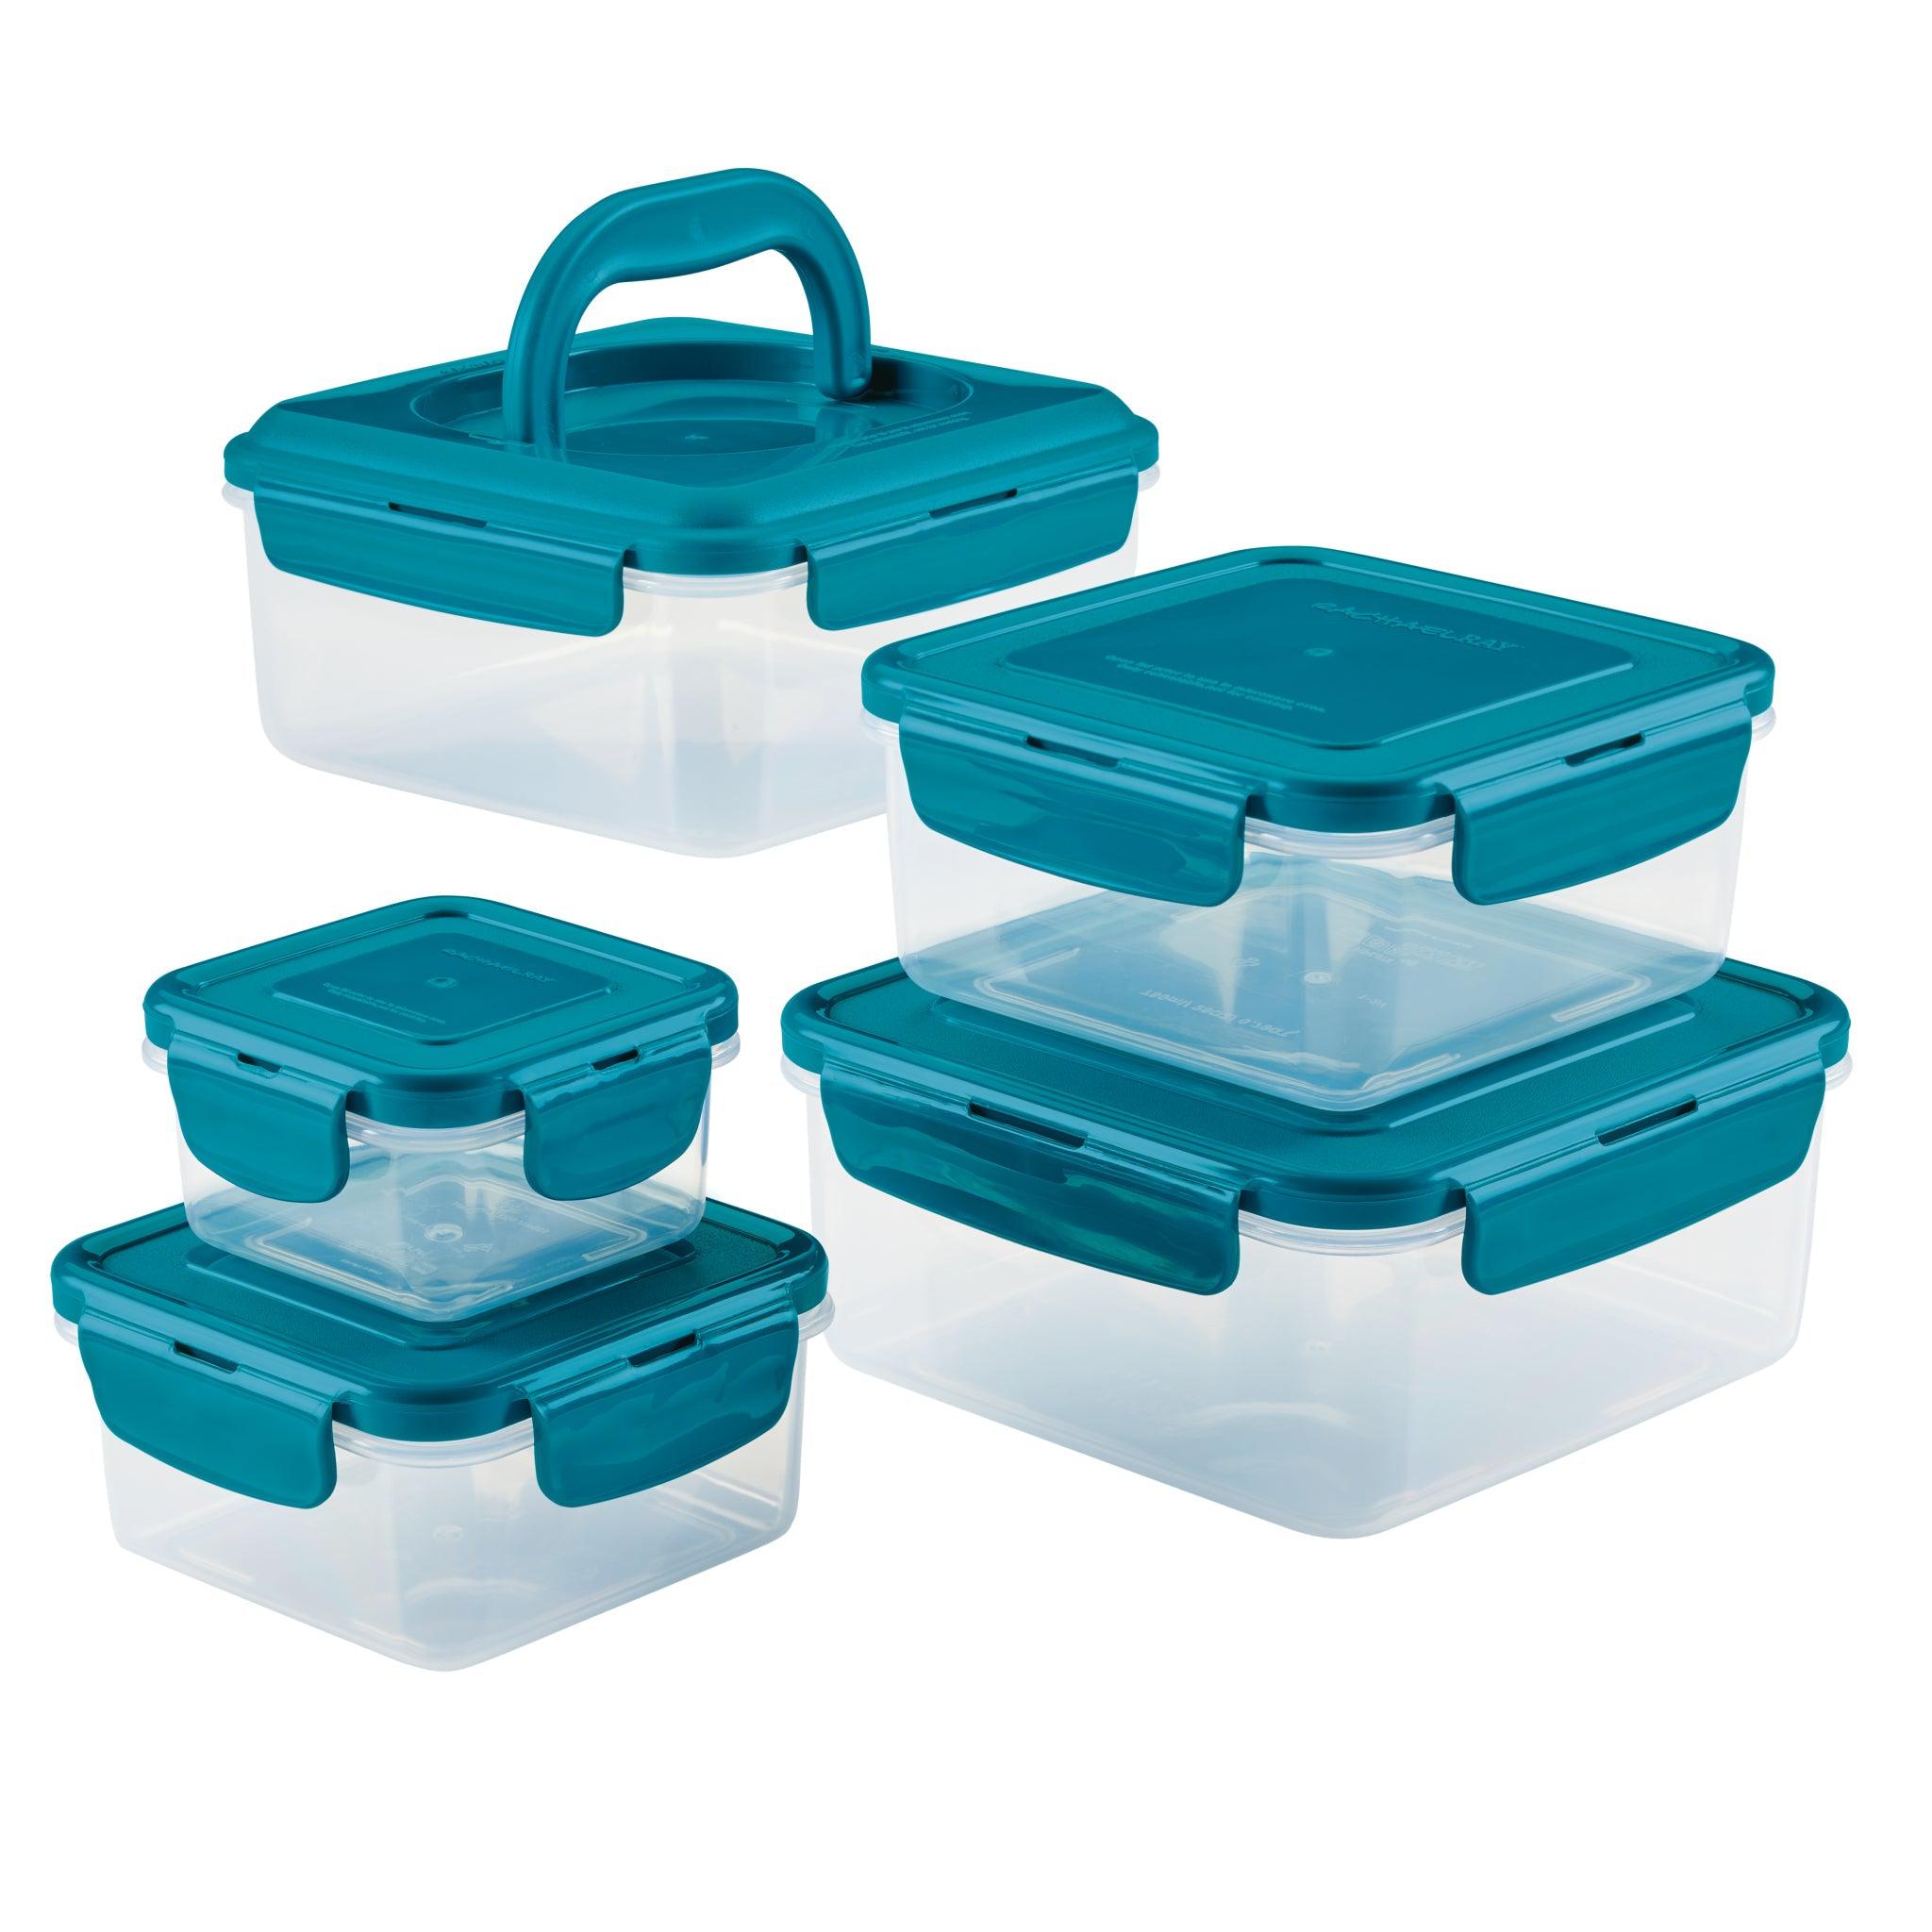 These Rubbermaid Containers Have a Genius Airtight Design, and